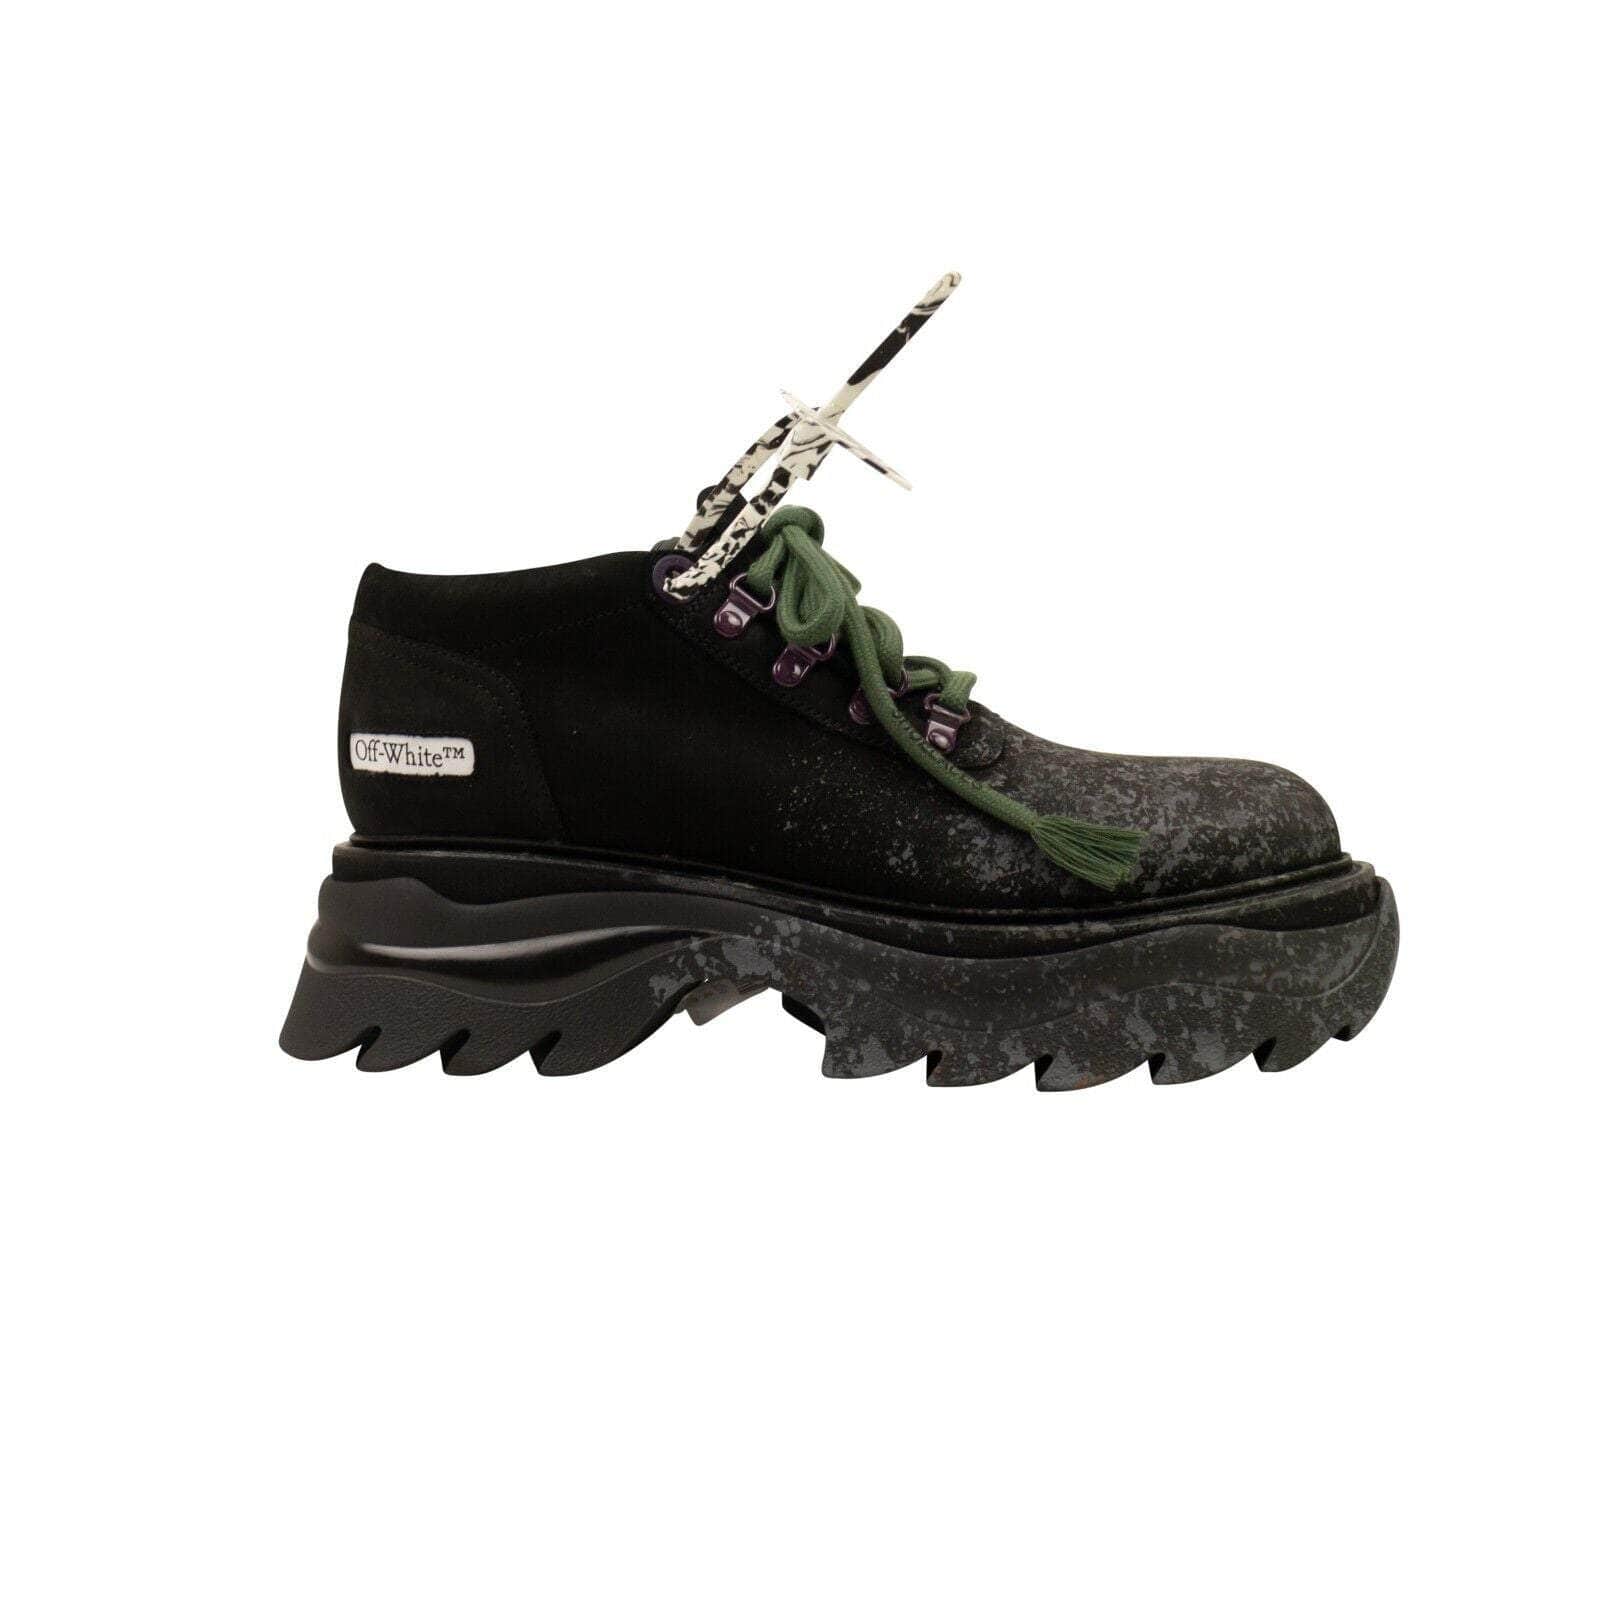 Off-White c/o Virgil Abloh 750-1000, channelenable-all, chicmi, couponcollection, gender-mens, main-shoes, mens-ankle-boots, mens-shoes, off-white-c-o-virgil-abloh, size-41, size-42 41 Black Chunky Ridged Sole Boot OFW-XFTW-0017/41 OFW-XFTW-0017/41